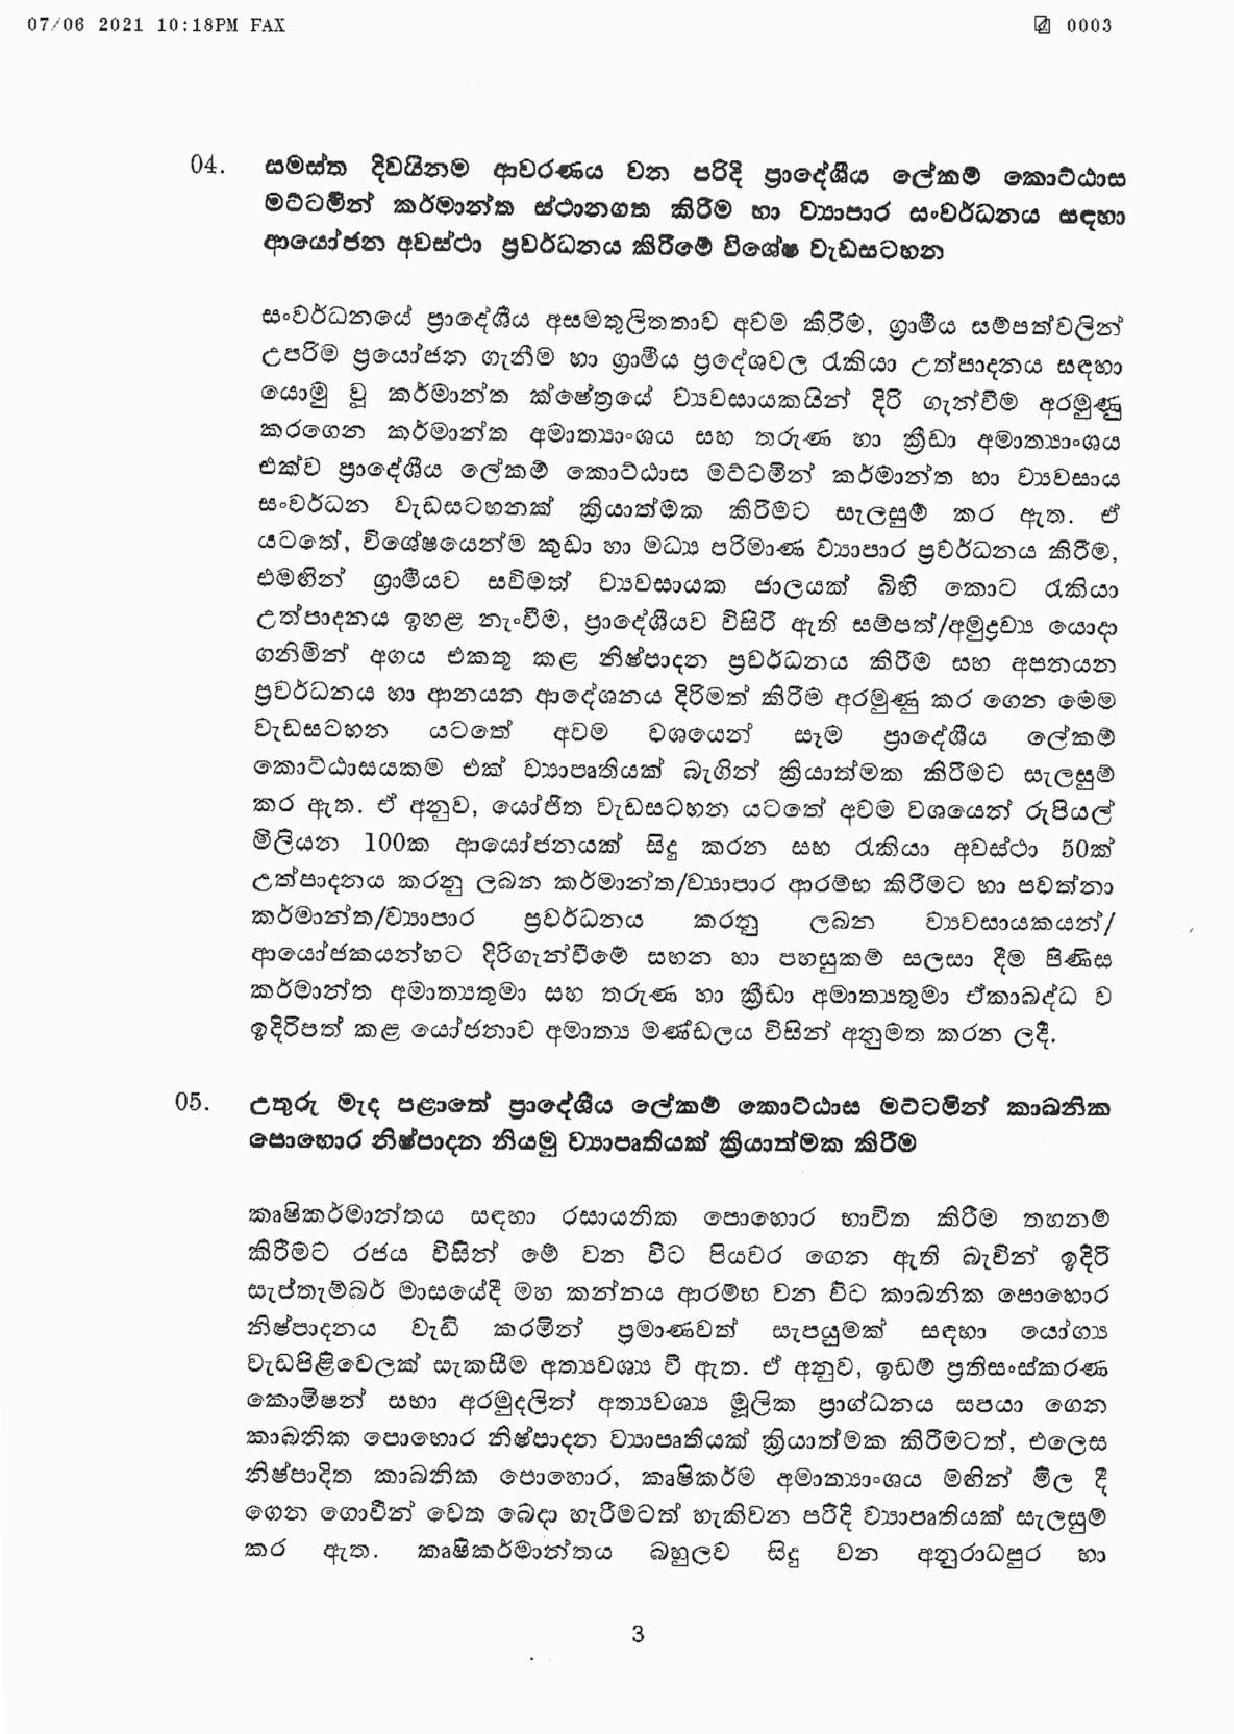 Cabinet Decisions on 07.06.2021 page 003